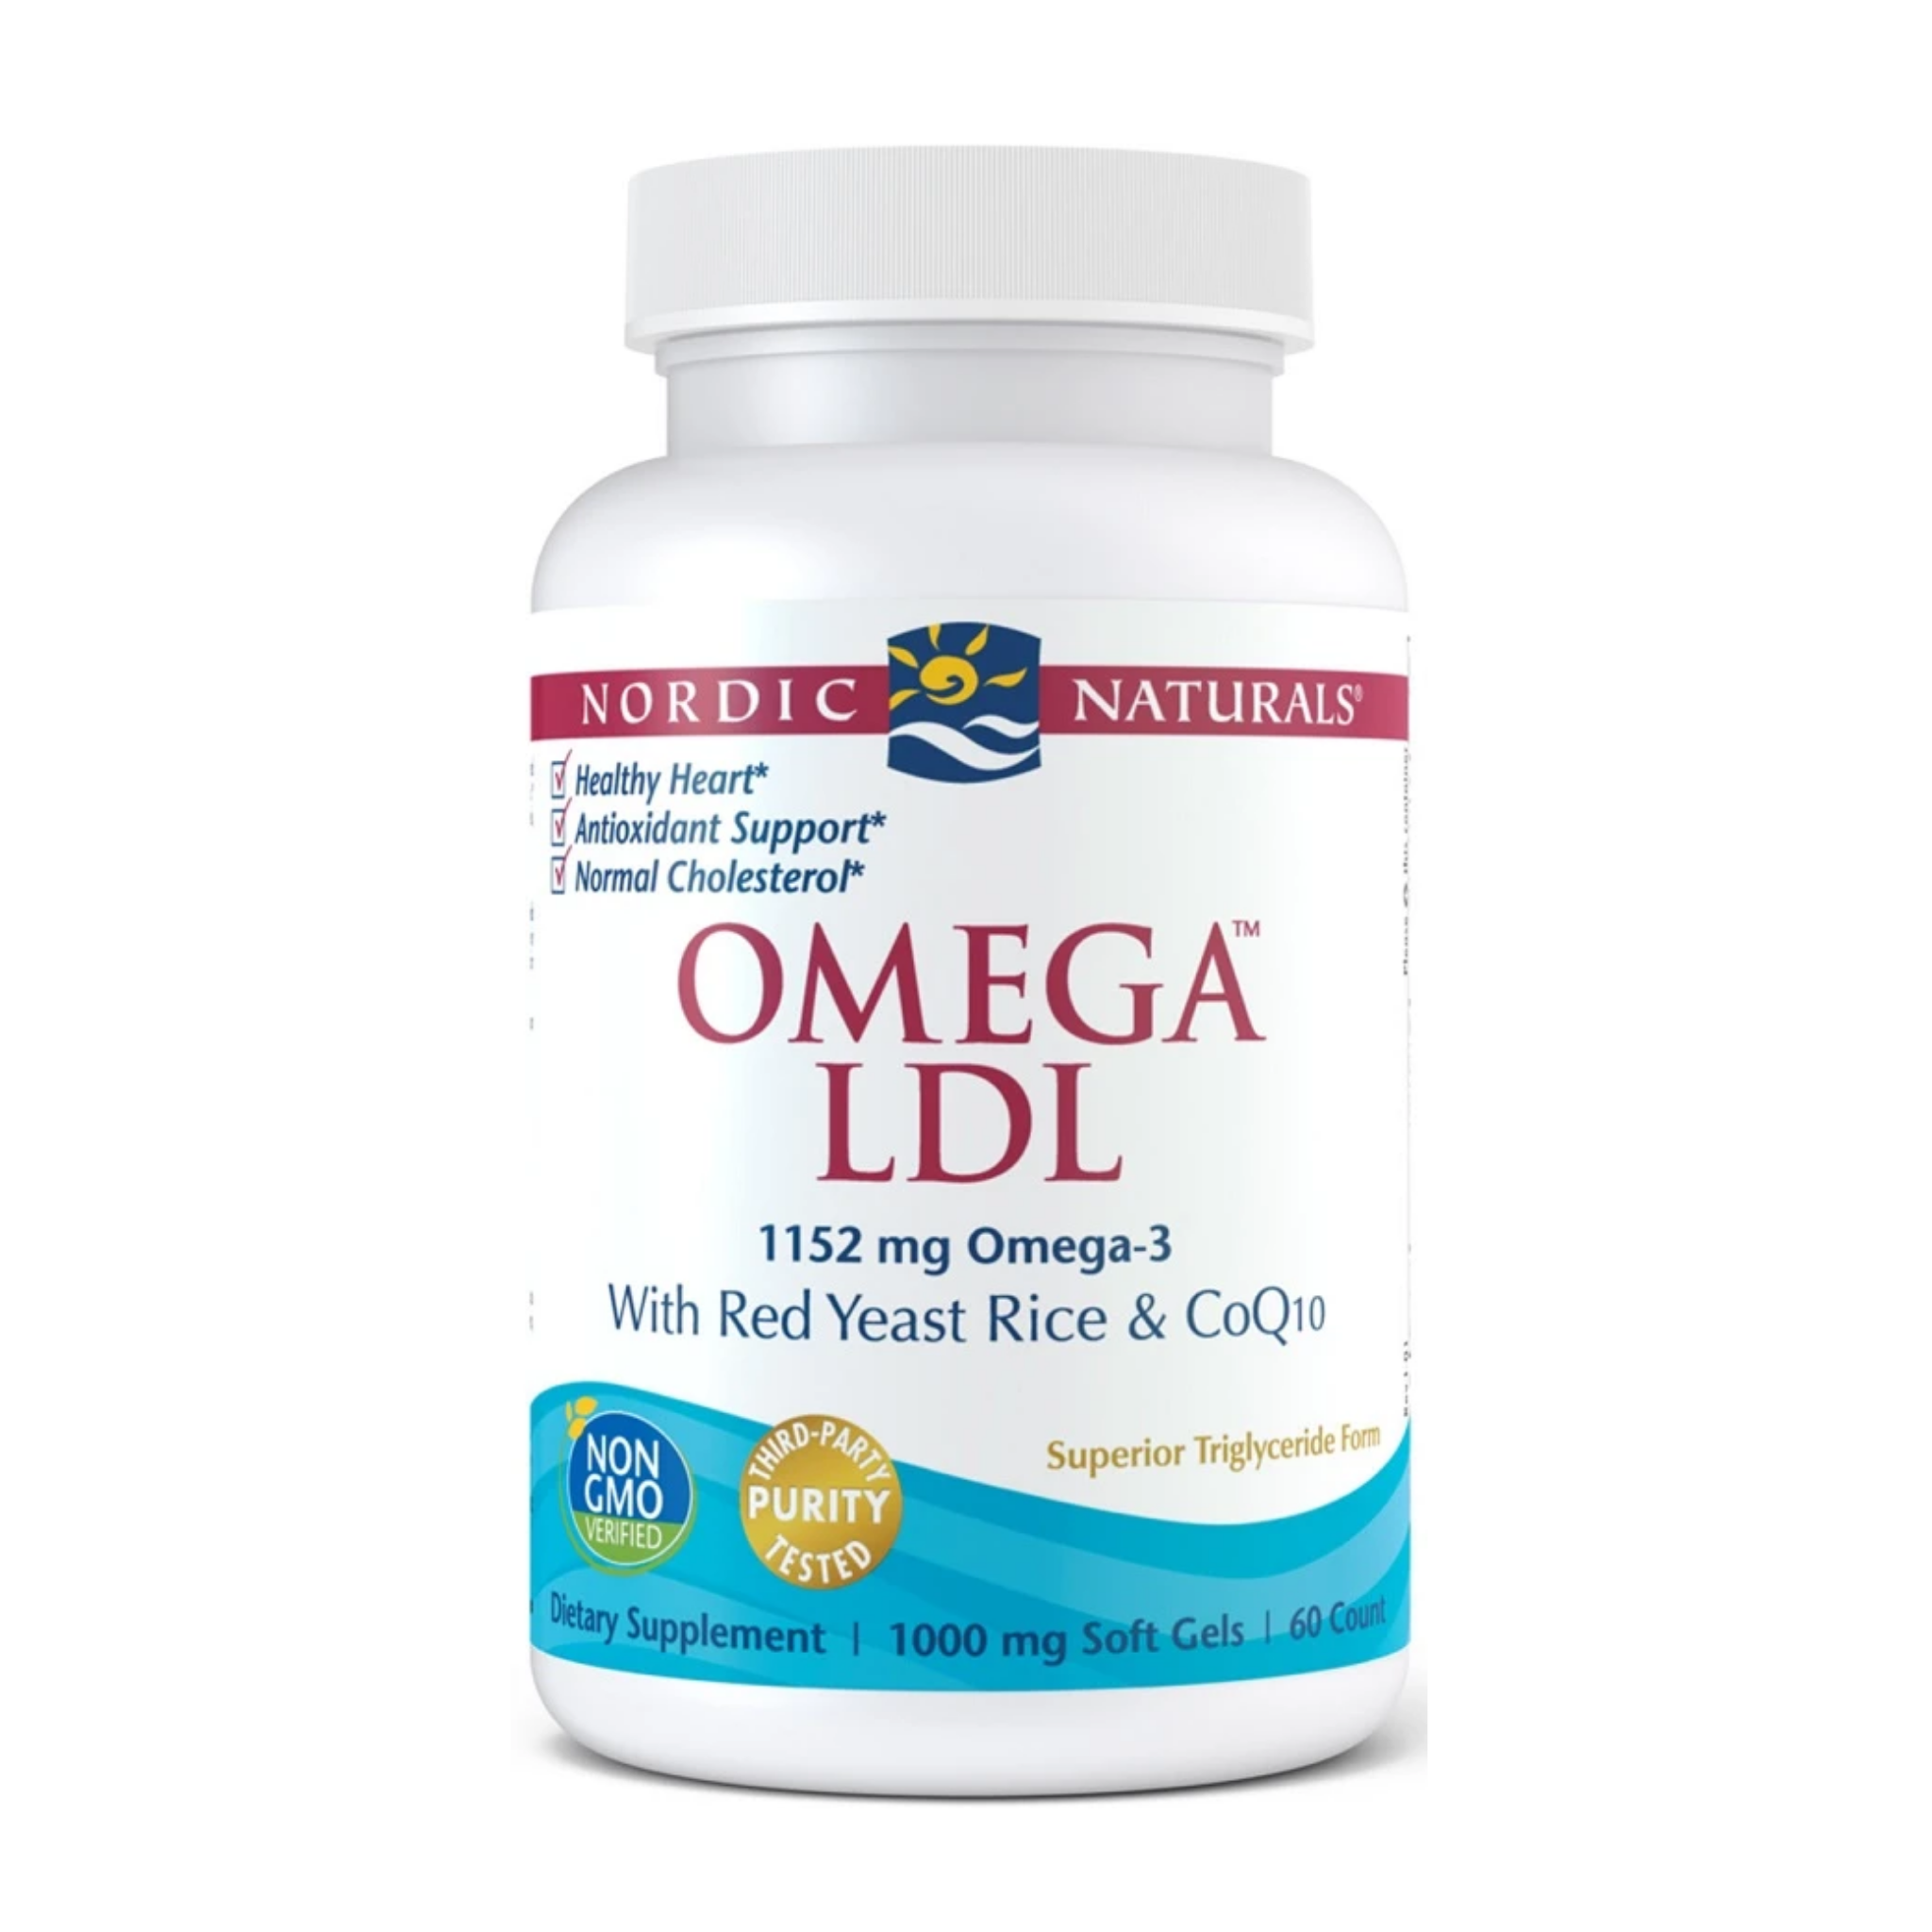 Nordic Naturals Omega LDL with Red Yeast Rice and CoQ10, 1152mg